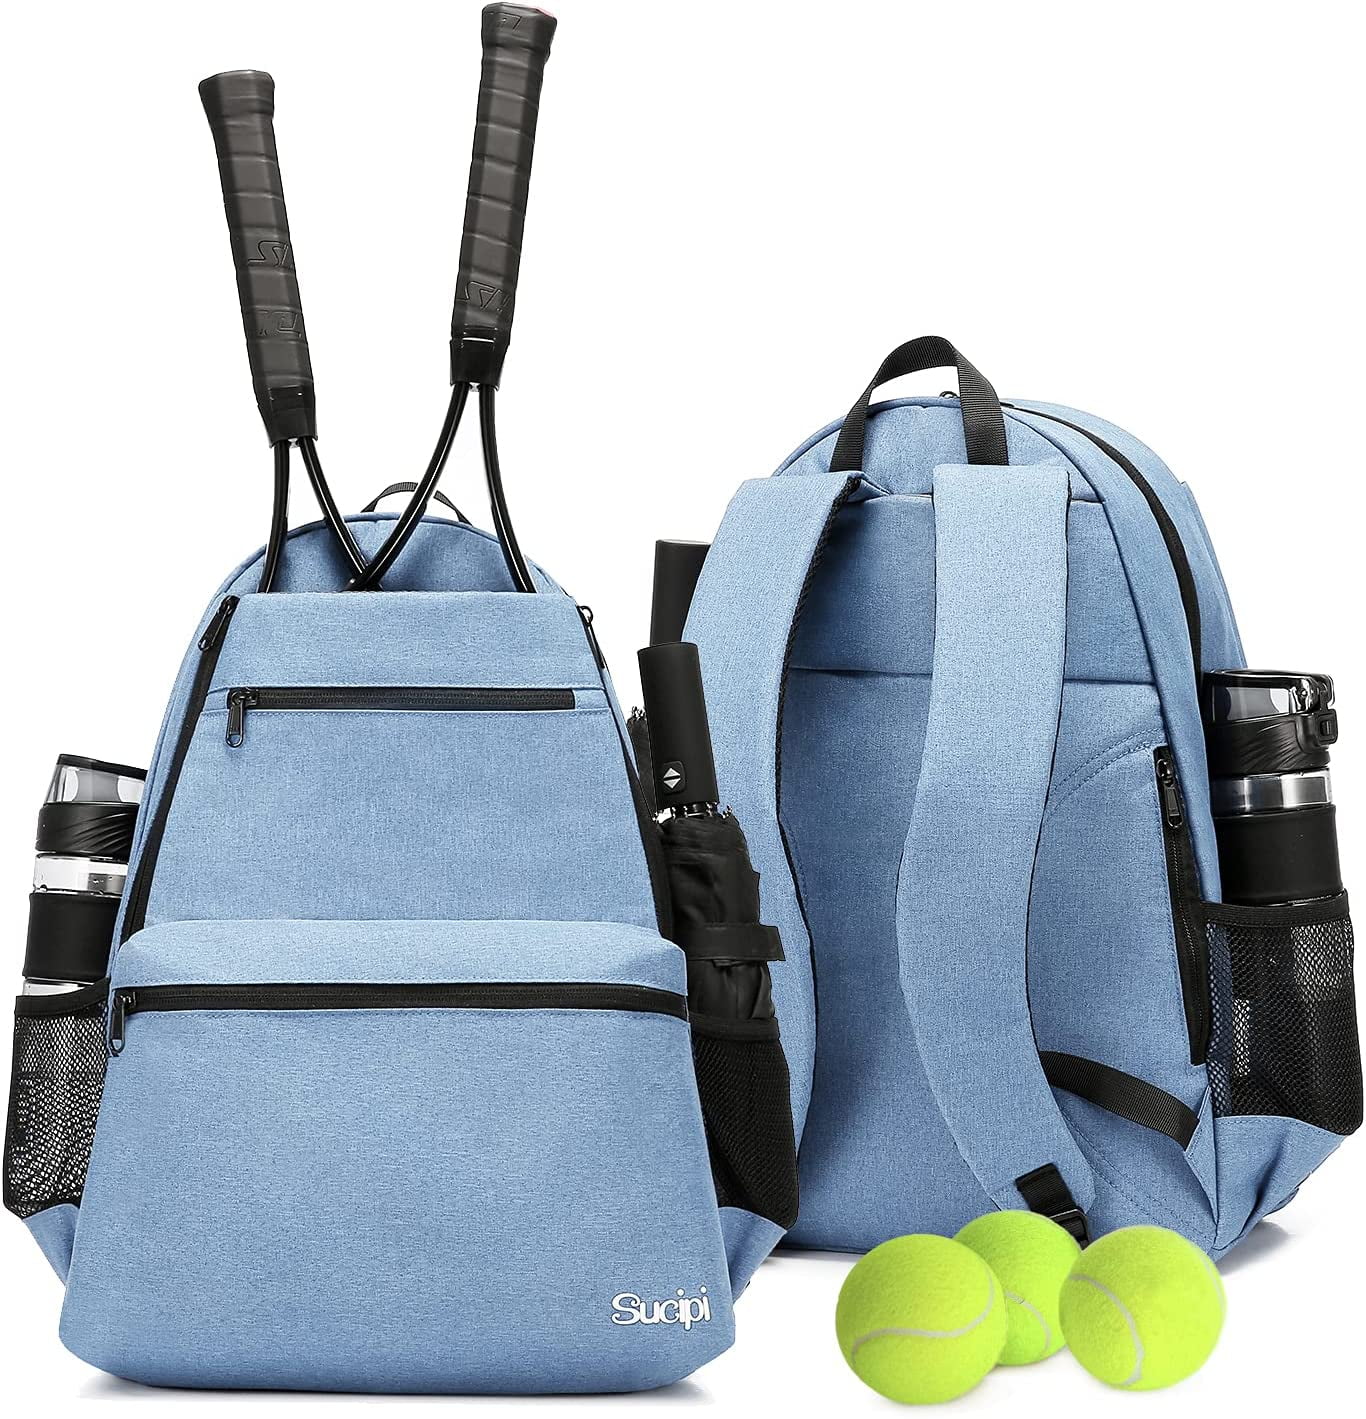 Sucipi Tennis Bag for Men and Women, Professional Tennis Backpack Racket  Bags Holds 2 Rackets with Ventilated Shoe Compartment-Blue 